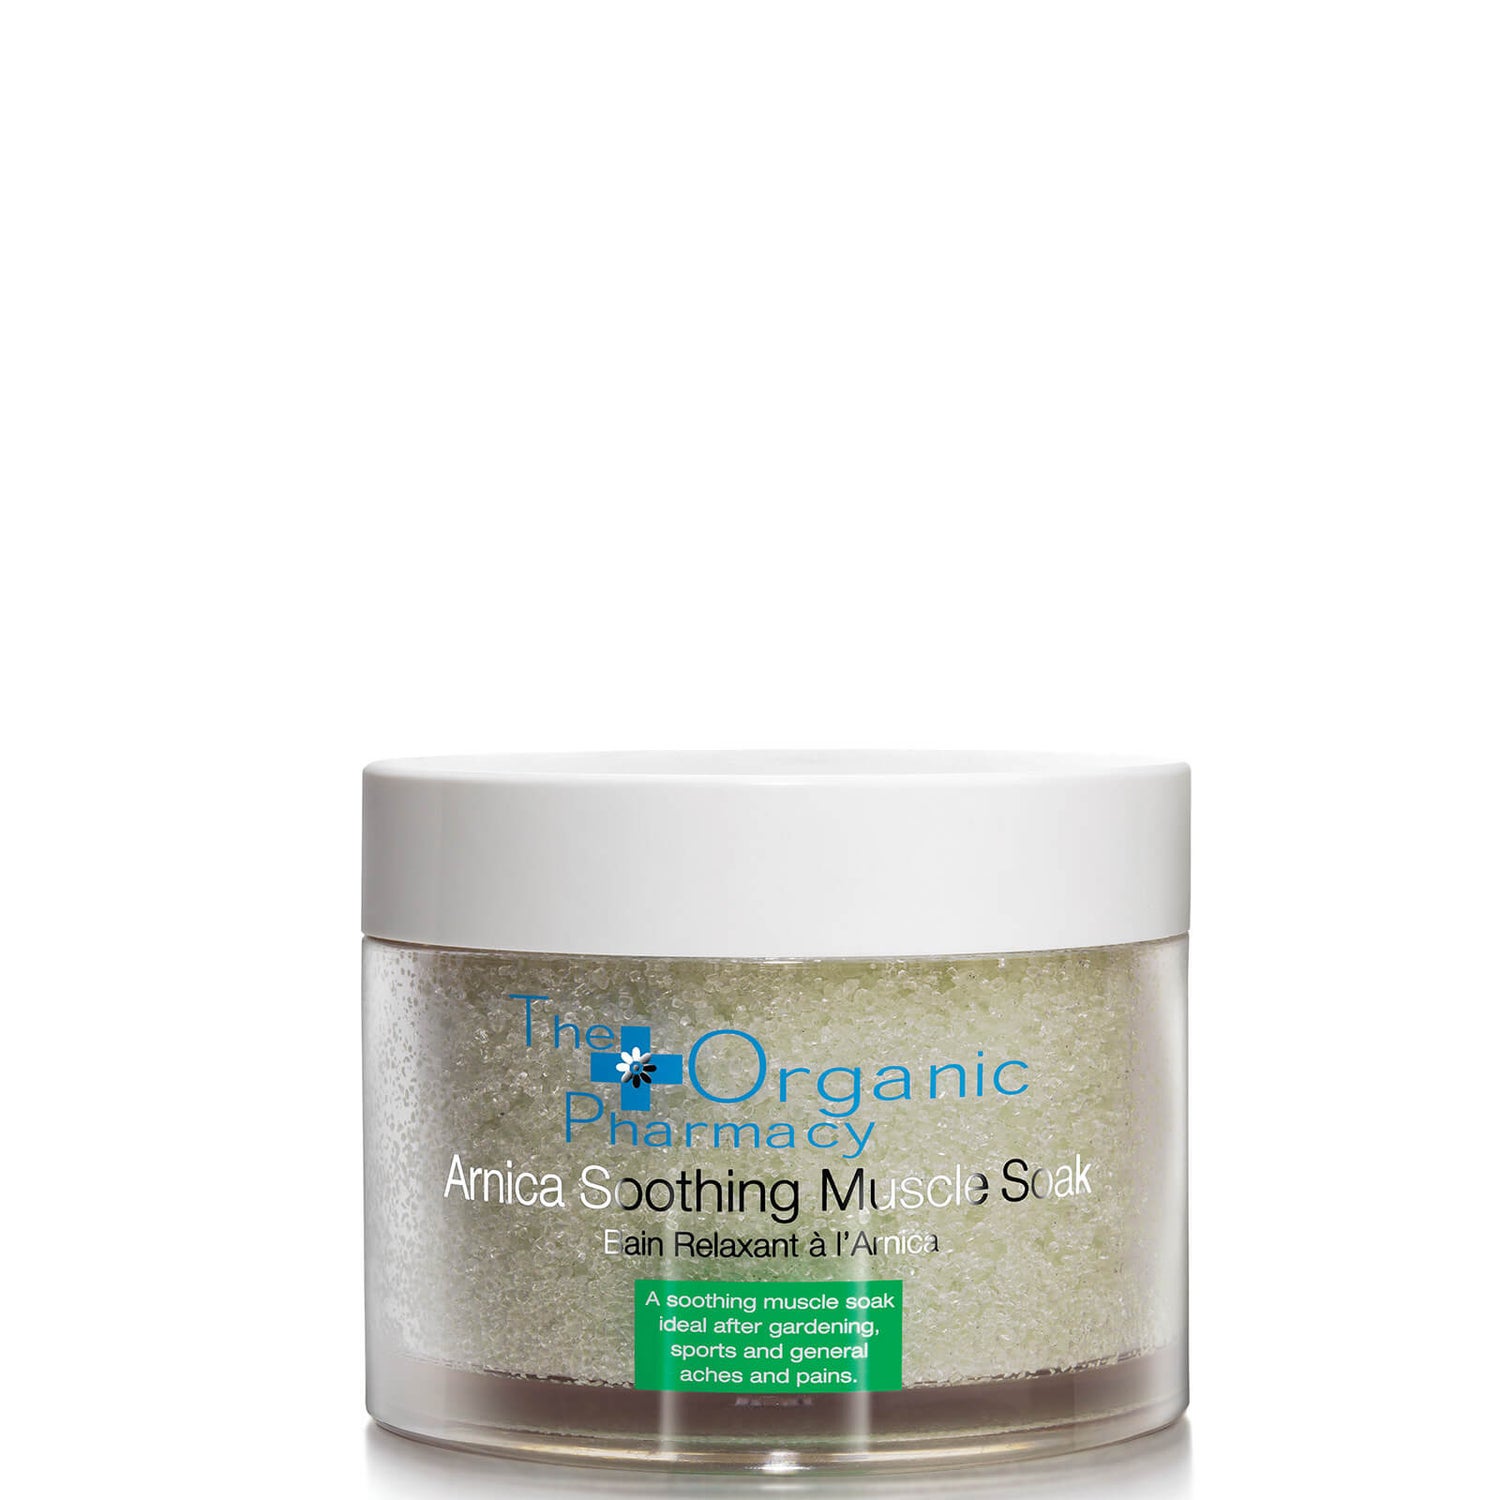 The Organic Pharmacy Arnica Soothing Muscle Soak (325 g.)